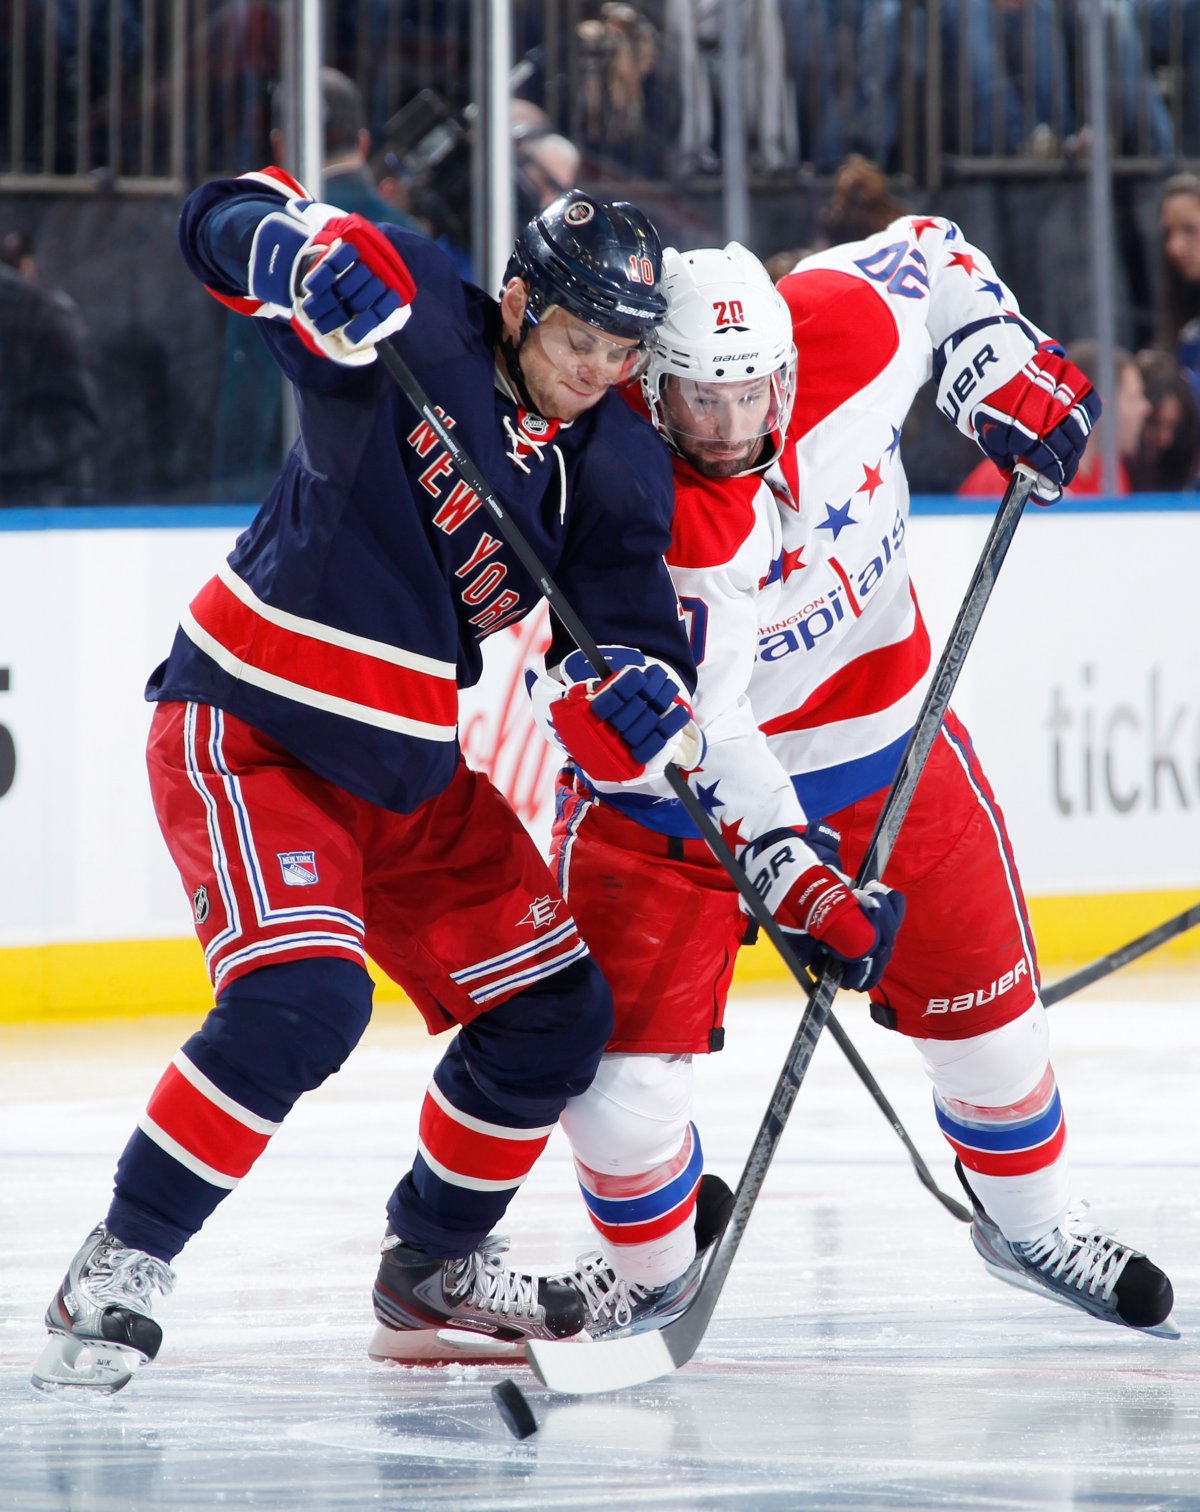 Marian Gaborik #10 of the New York Rangers and Troy Brouwer #20 of the Washington Capitals battle for the puck at center ice following a face-off at Madison Square Garden on March 24, 2013 in New York City. (Photo by Scott Levy/NHLI via Getty Images).